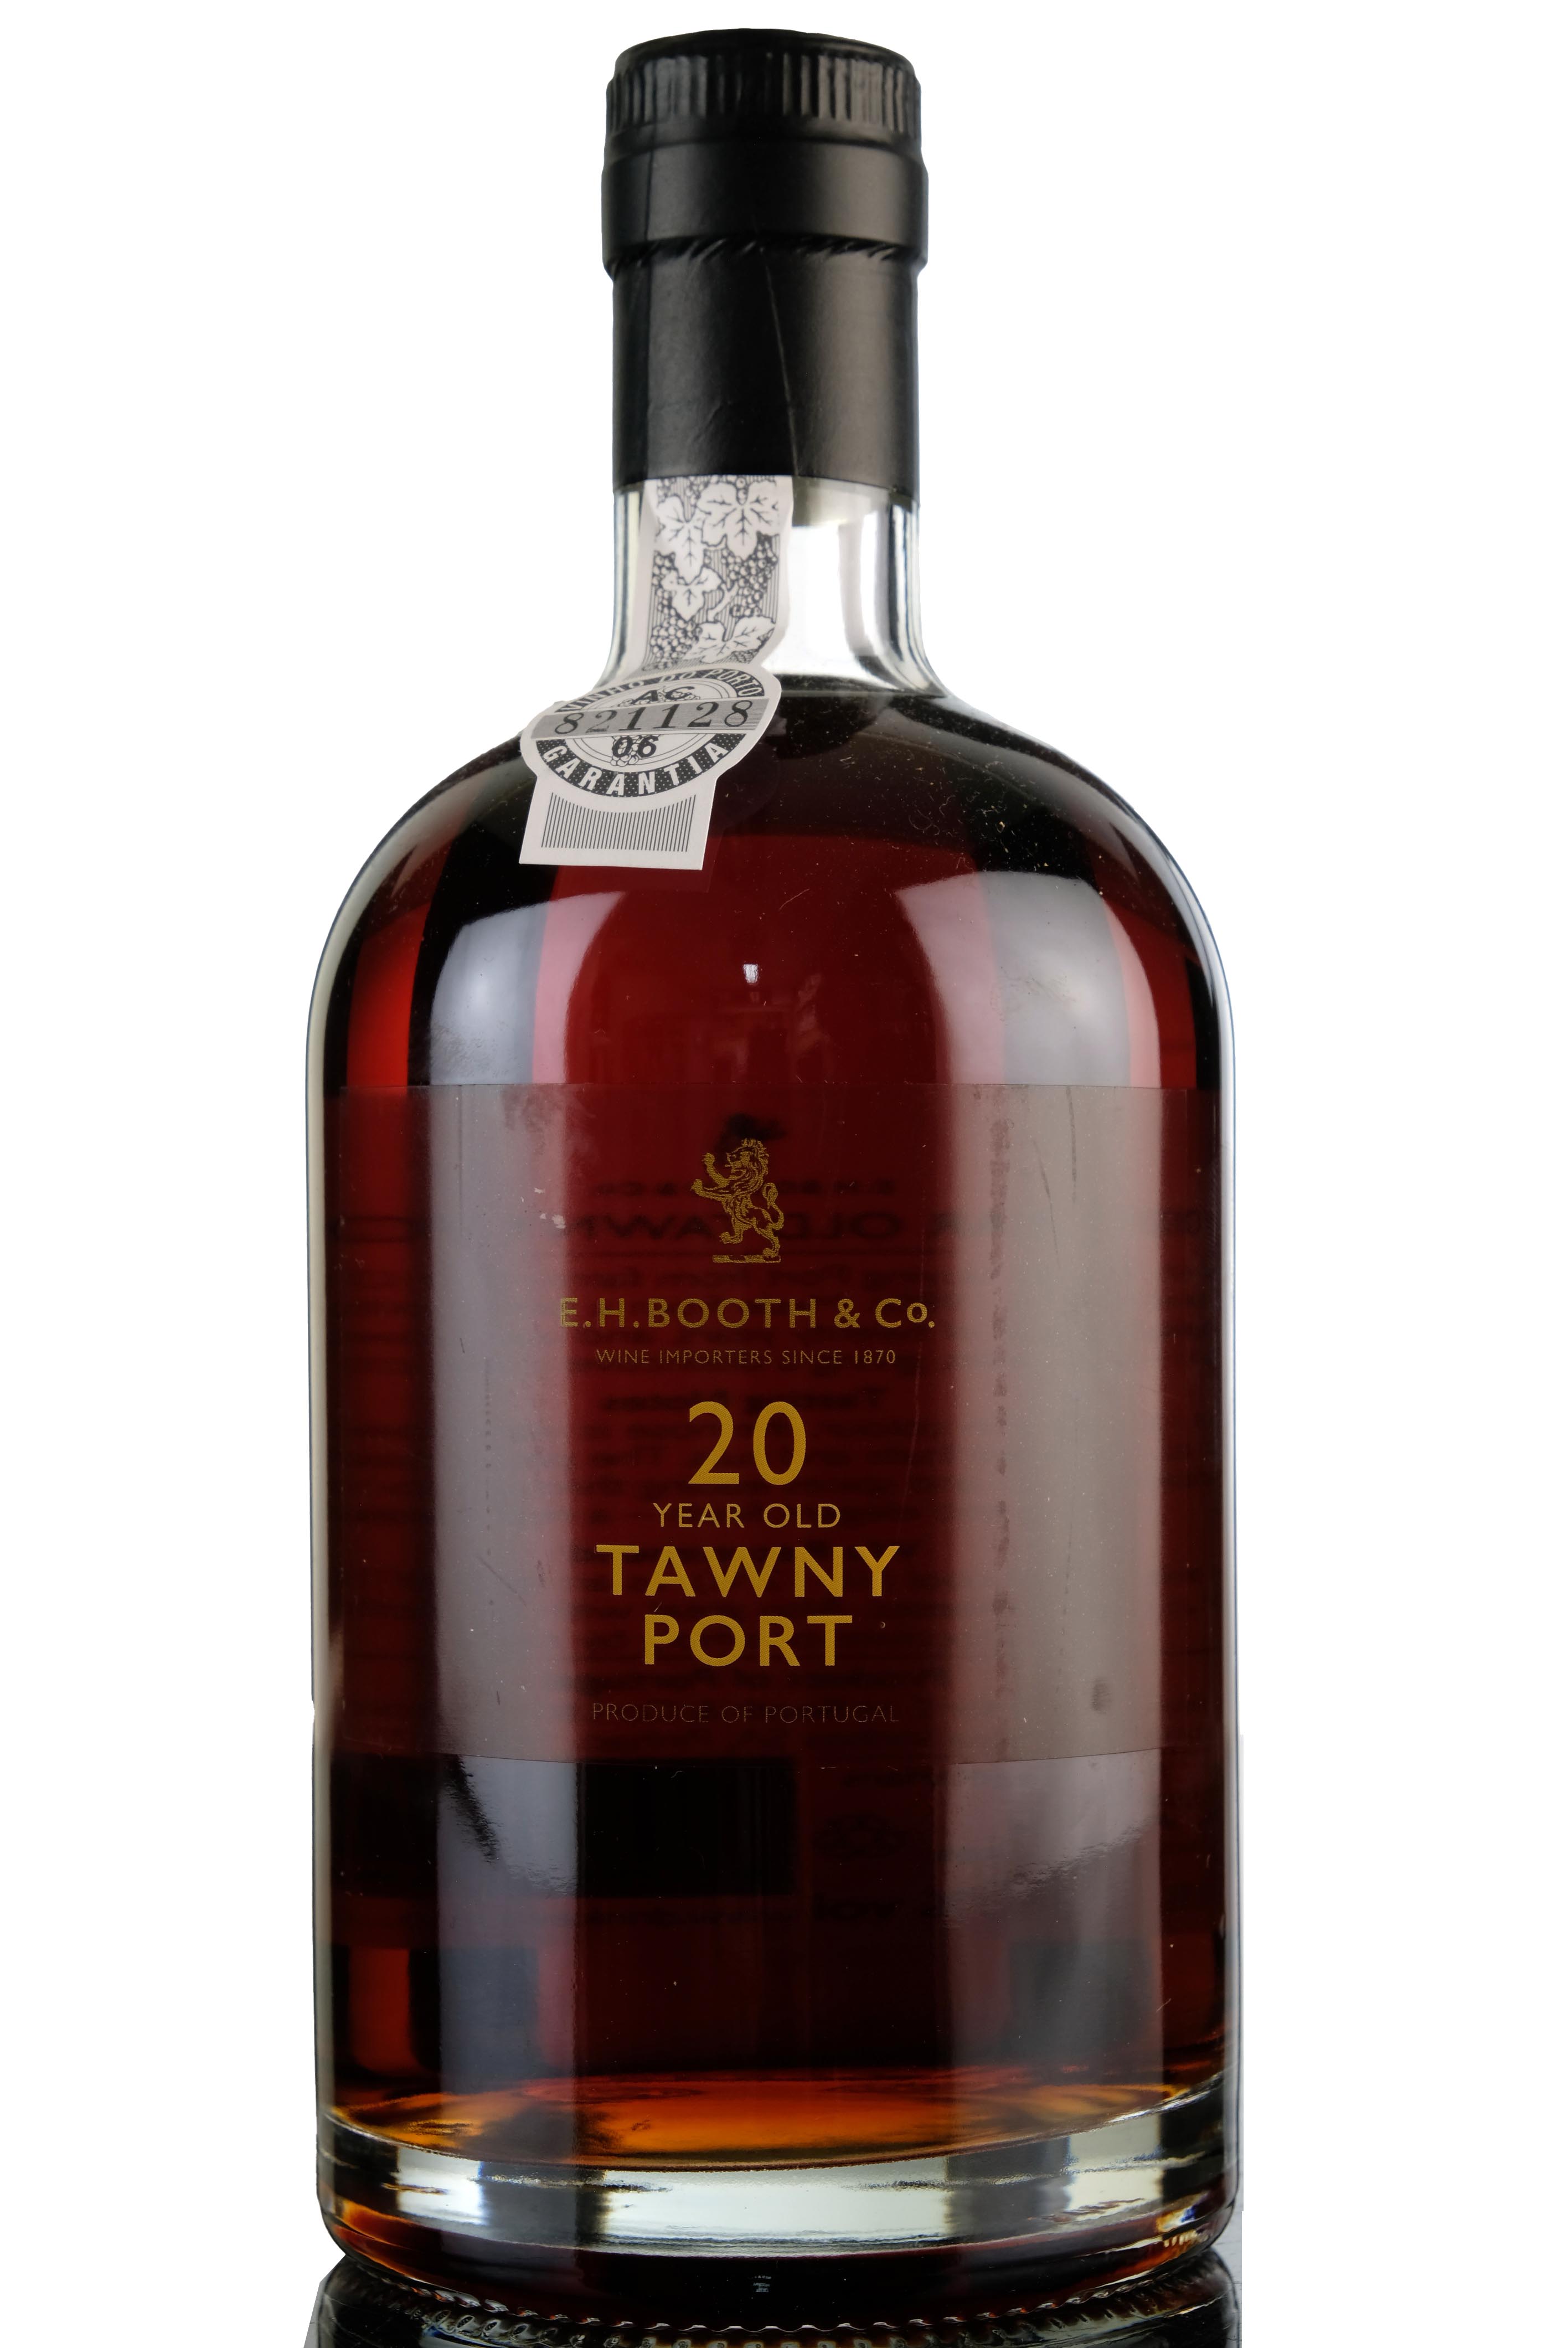 E.H Booth & Co 20 Year Old Tawny Port - 50cl